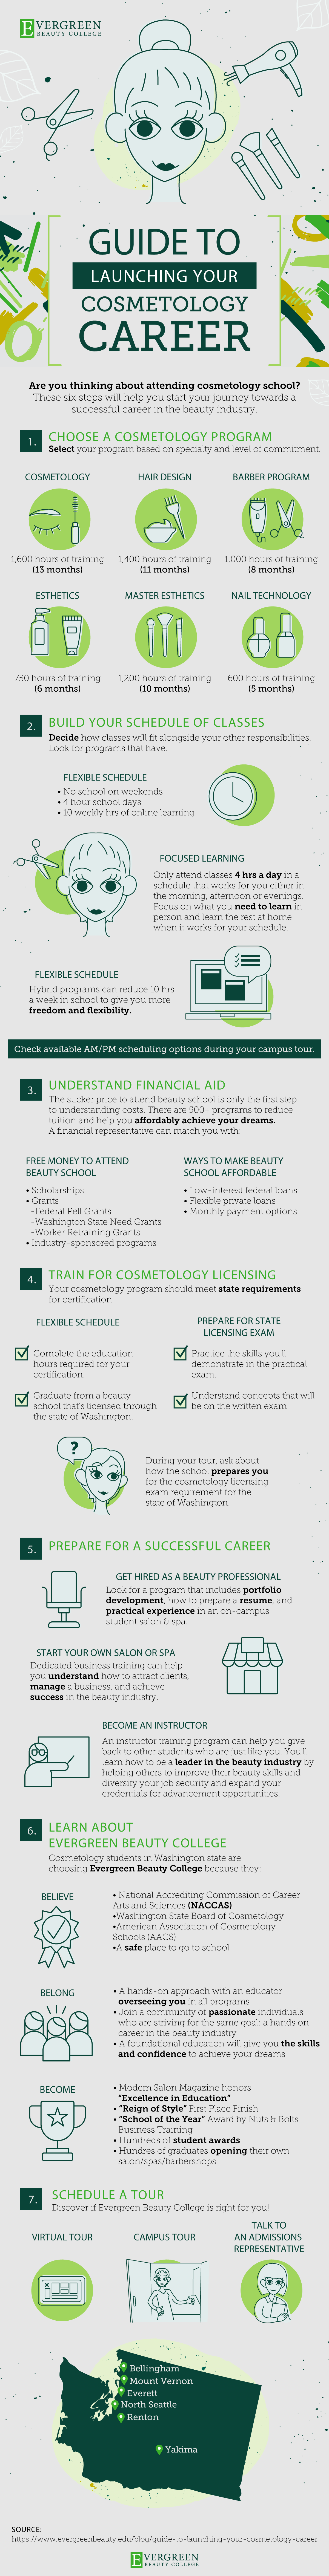 Guide to Launching Your Cosmetology Career